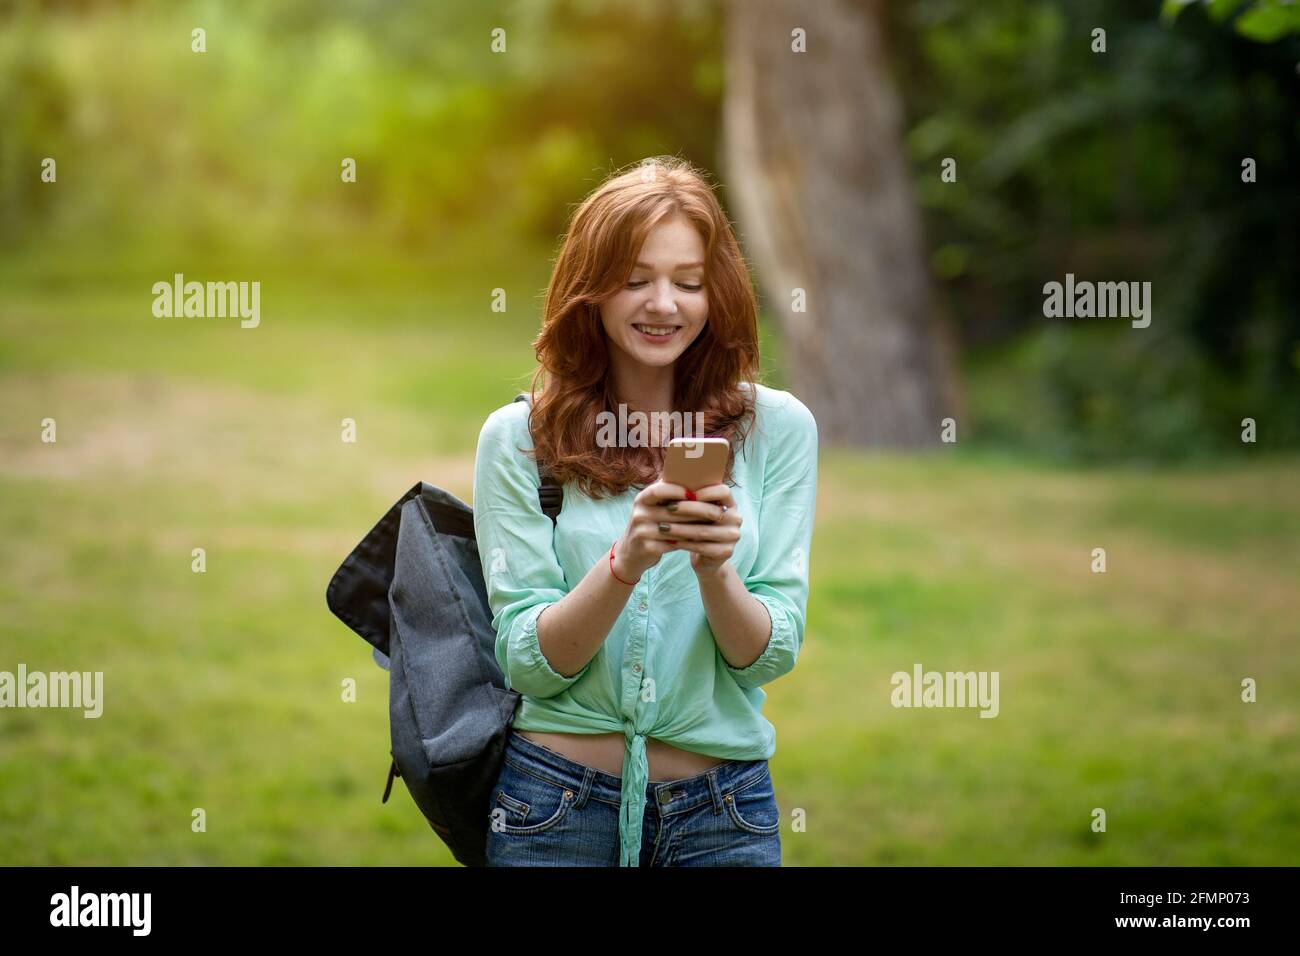 Cheerful redhead student girl using smartphone outdoors, texting with friends Stock Photo